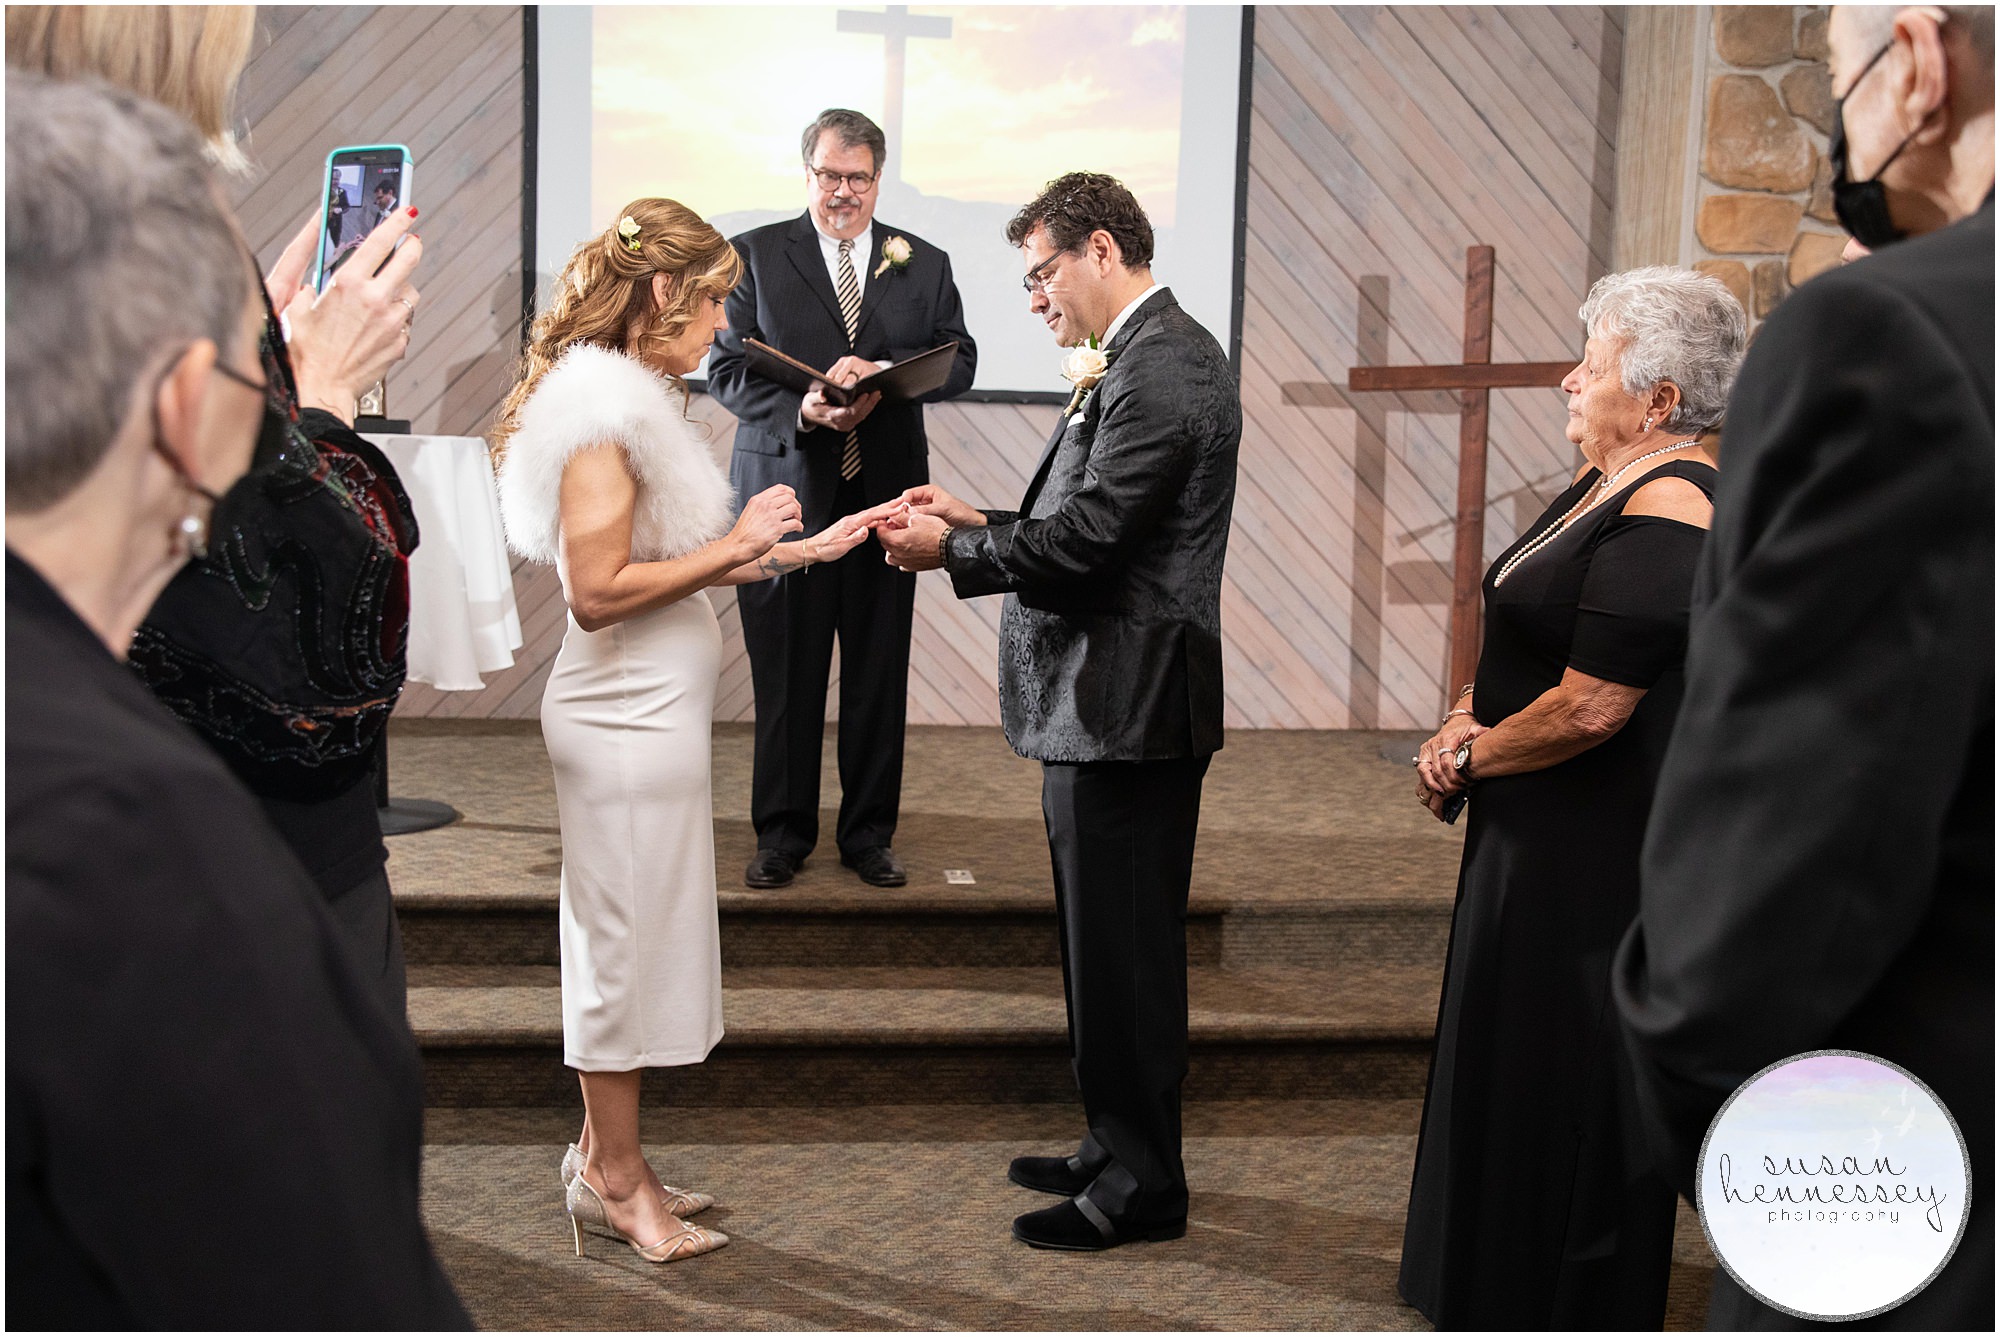 Ring exchange at wedding ceremony at Fellowship Alliance Chapel in South Jersey